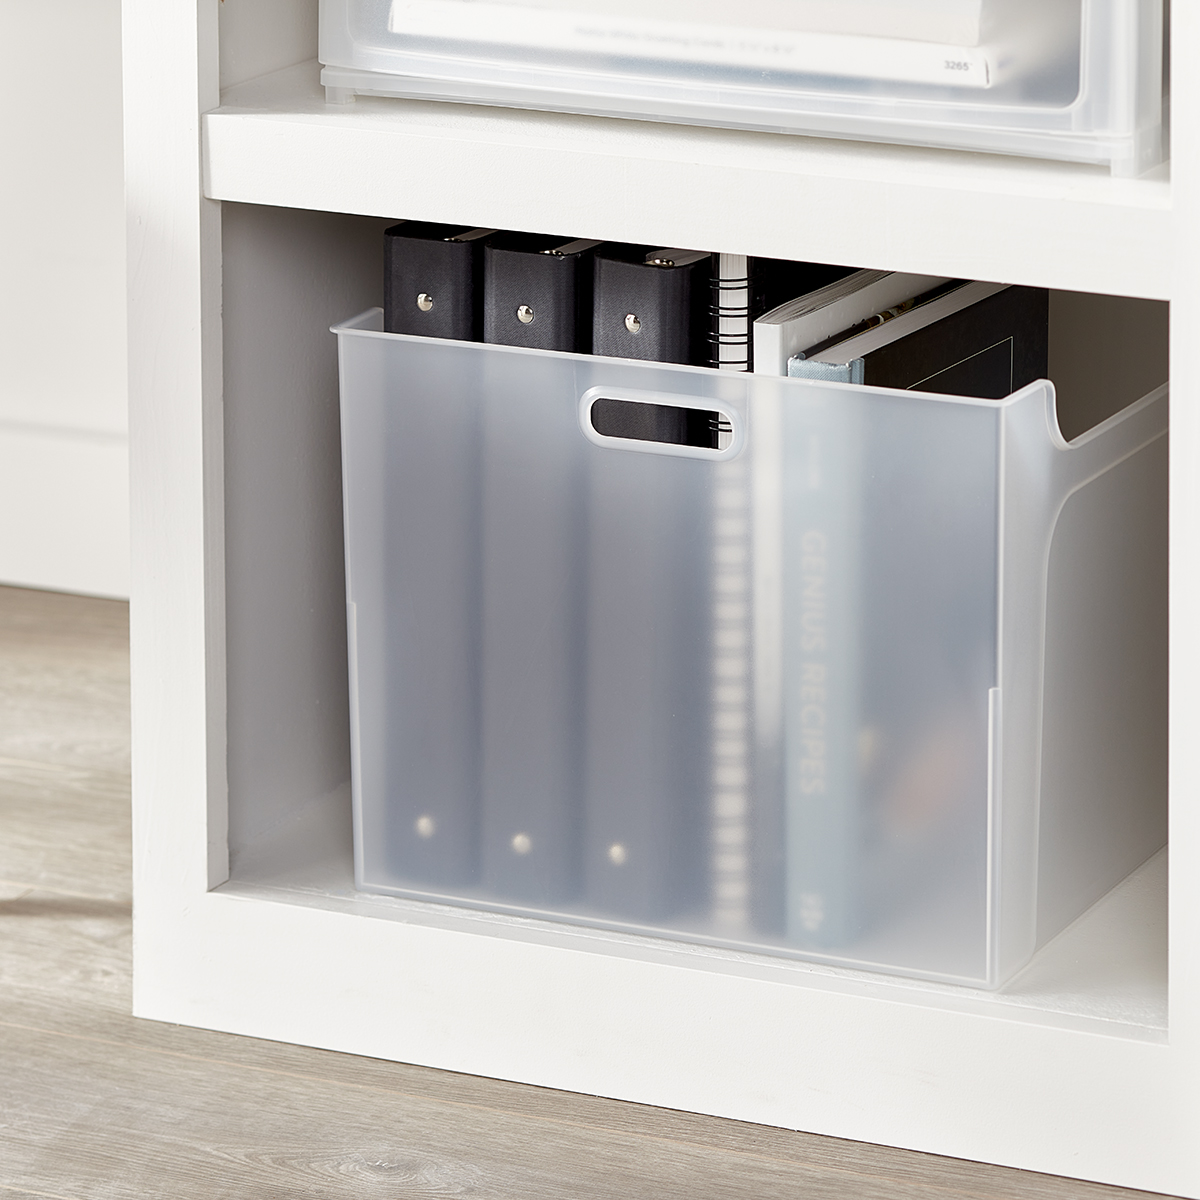 https://www.containerstore.com/catalogimages/434732/10080907_Shimo_large_tall_bin.jpg